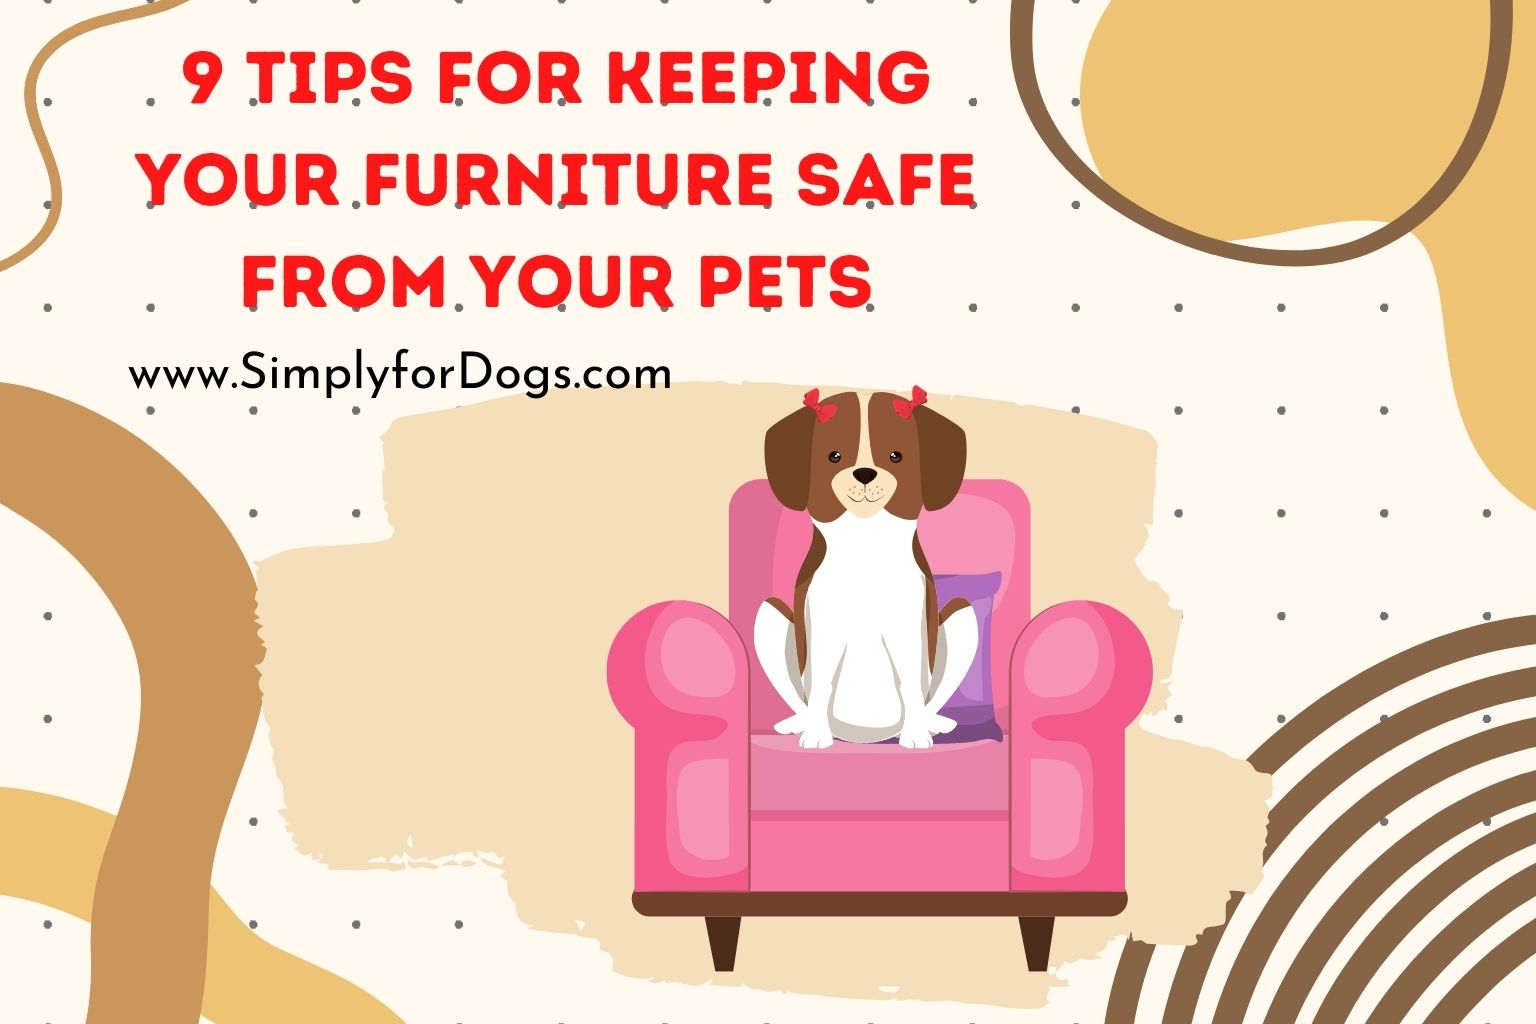 9 Tips for Keeping Your Furniture Safe from Your Pets